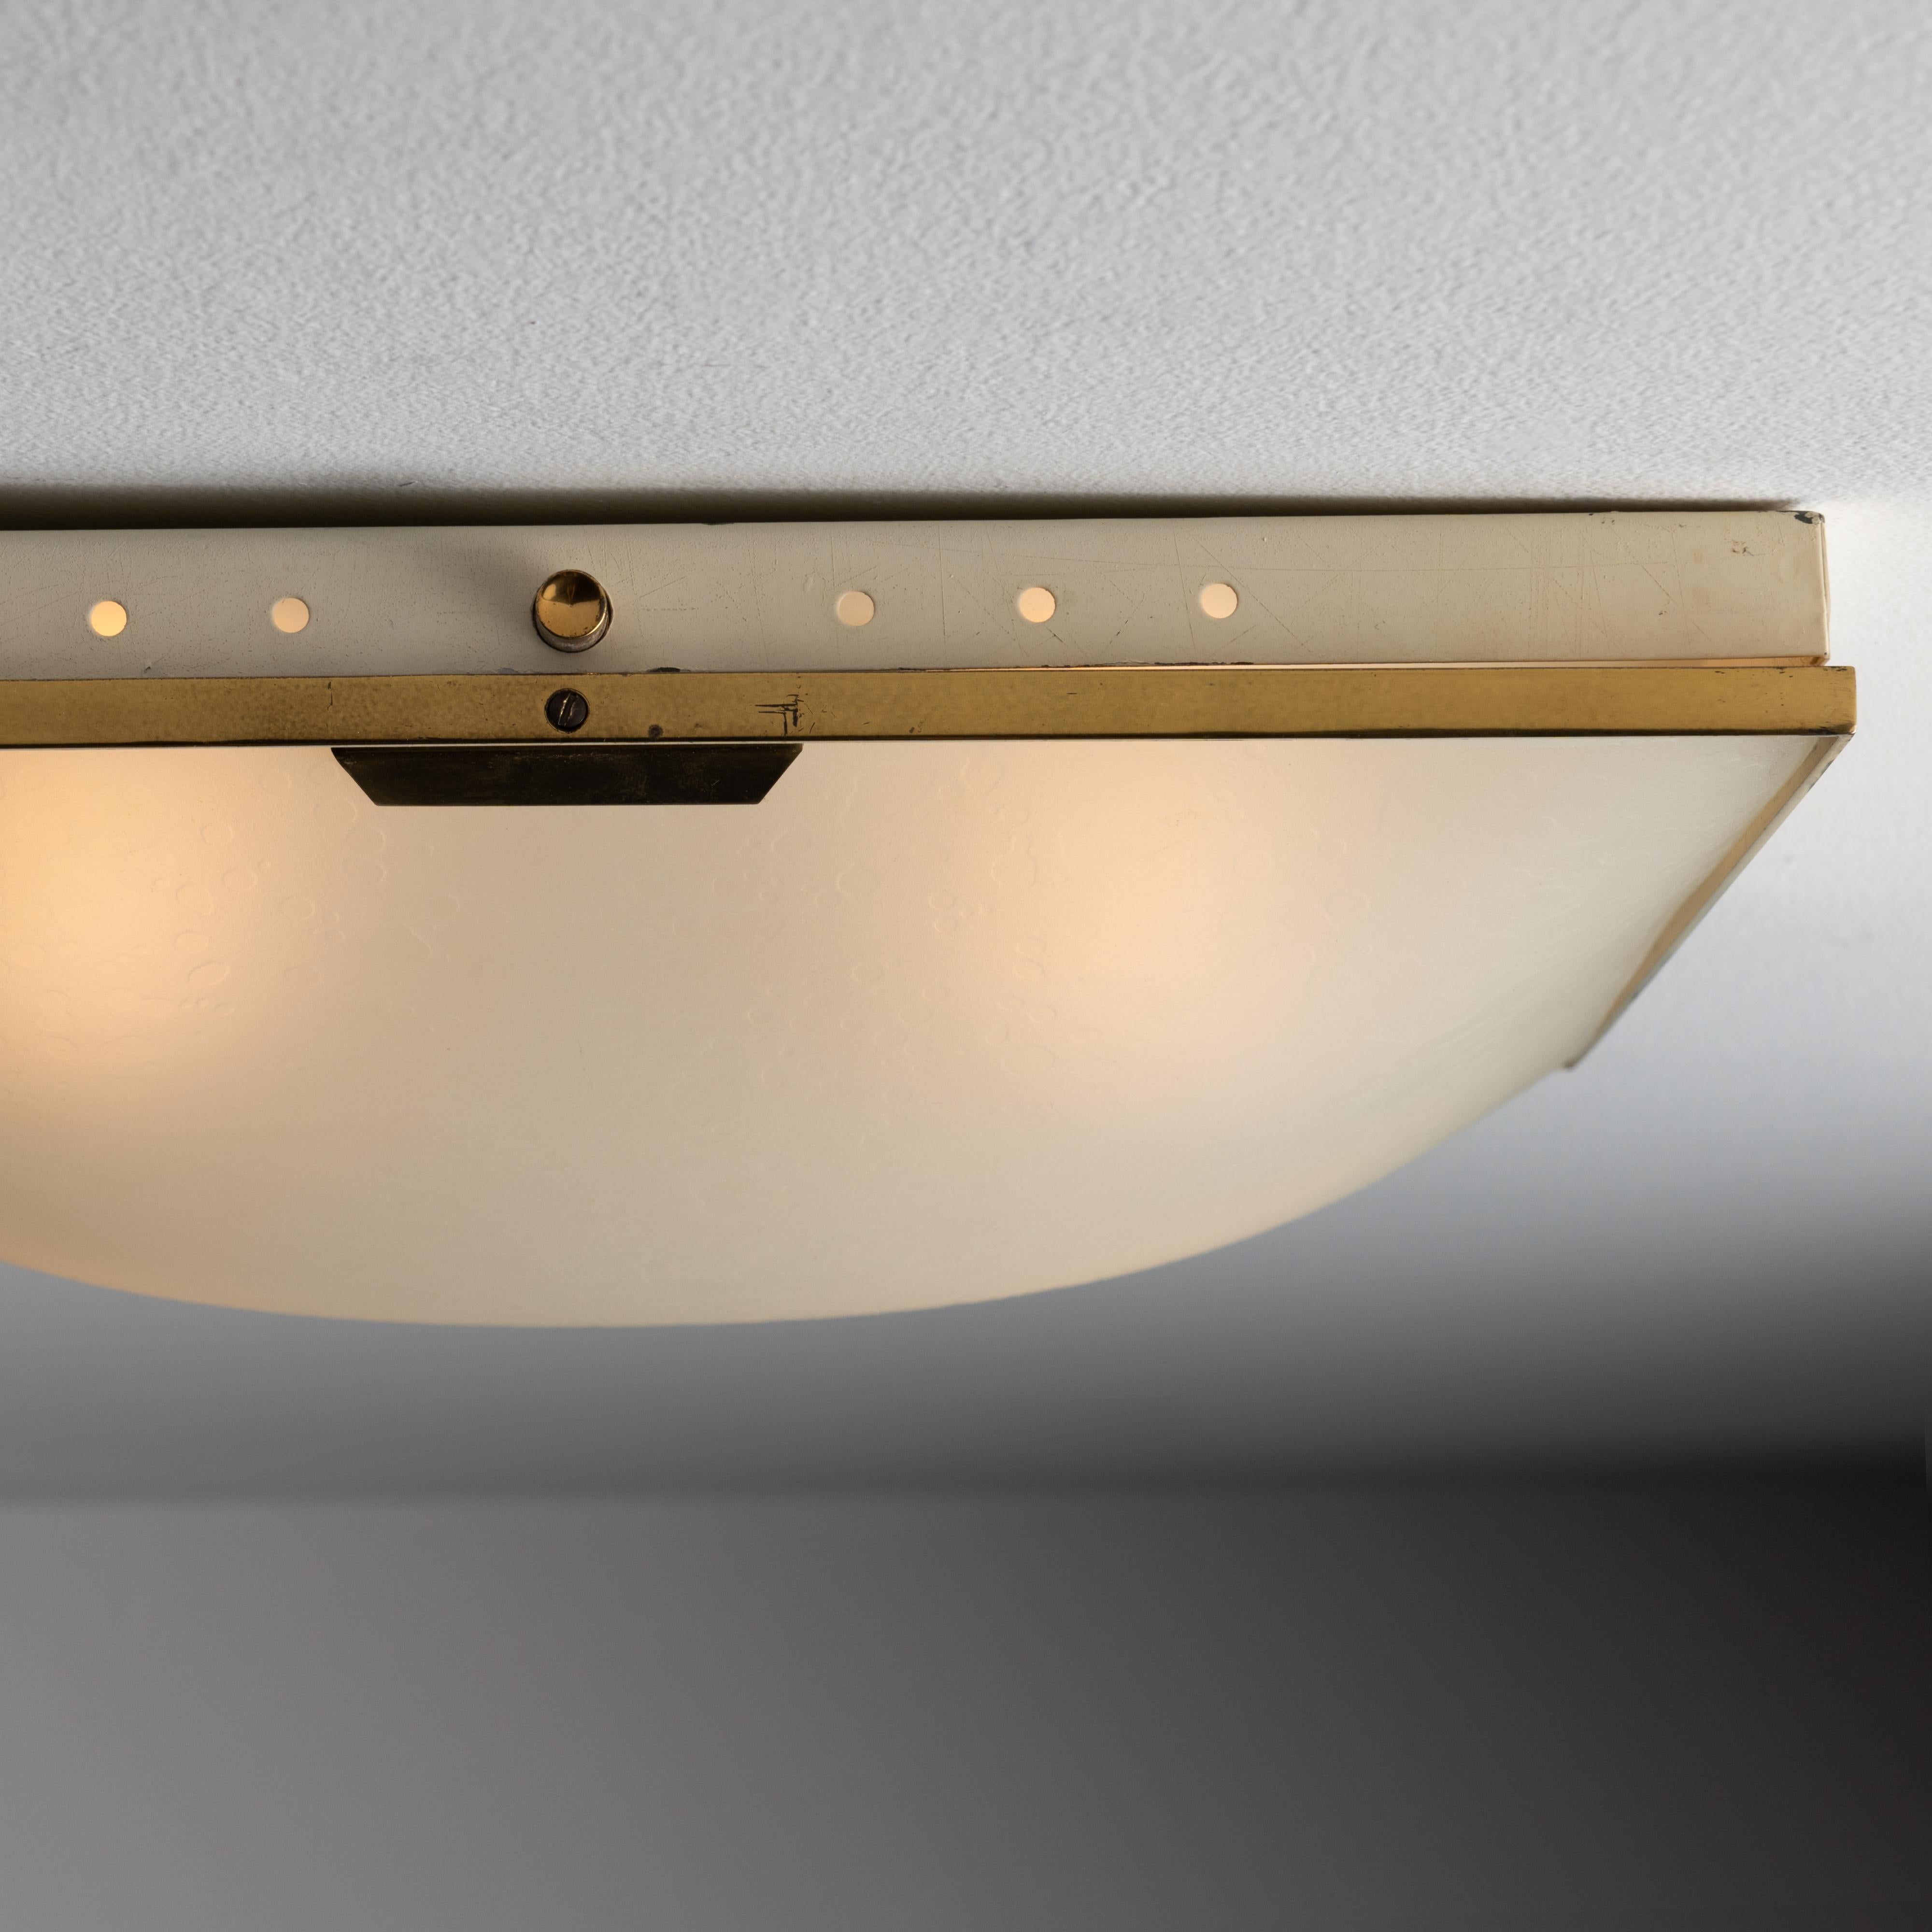 Model 1136 Flush Mount by Stilnovo. Designed and manufactured in Italy circa the 1960s. Textured translucent glass sets the seen on these subtle, gorgeous flush mounts. Very iconic Stilnovo design from this era. Holds four E14 socket types, adapted